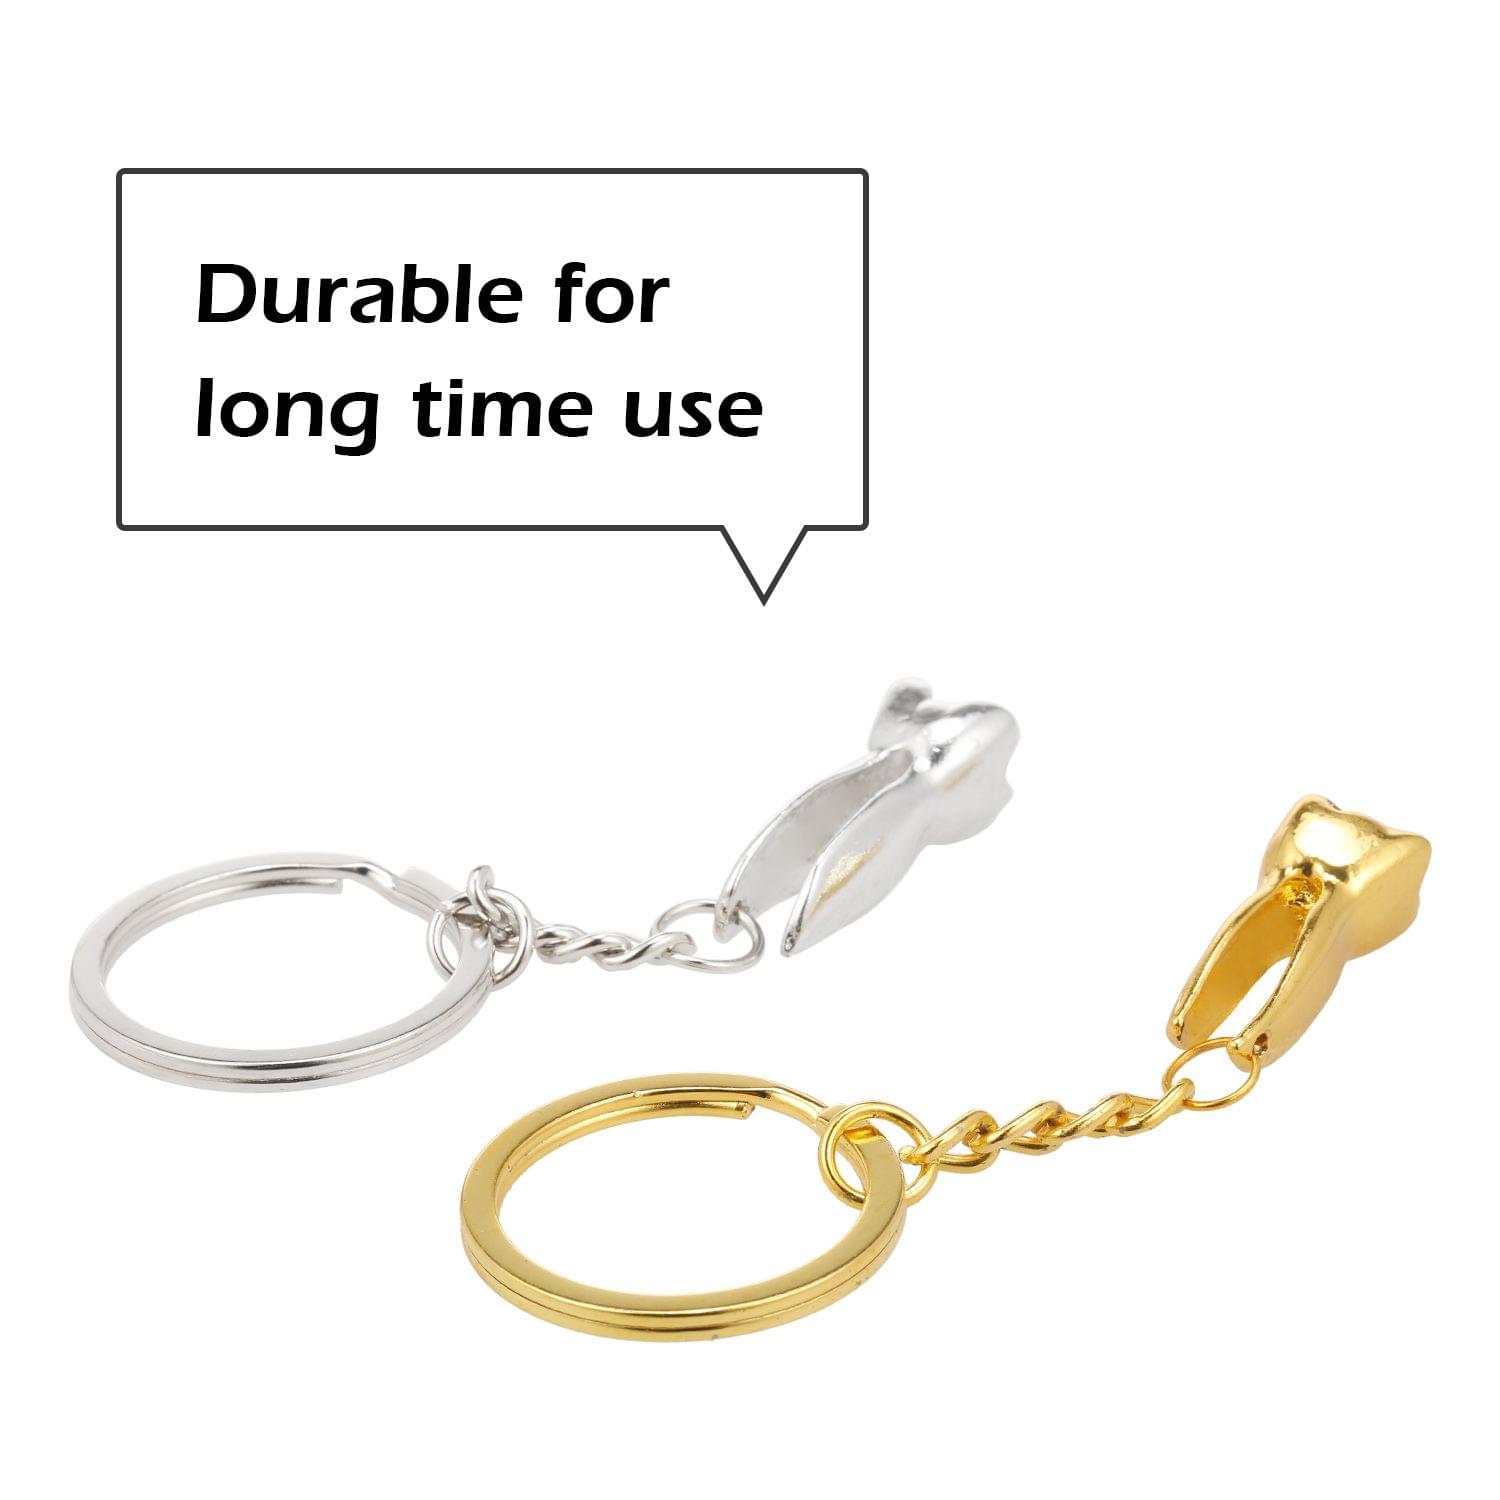 Silver Tooth-shaped Key Chain Dental Theme Stainless Steel